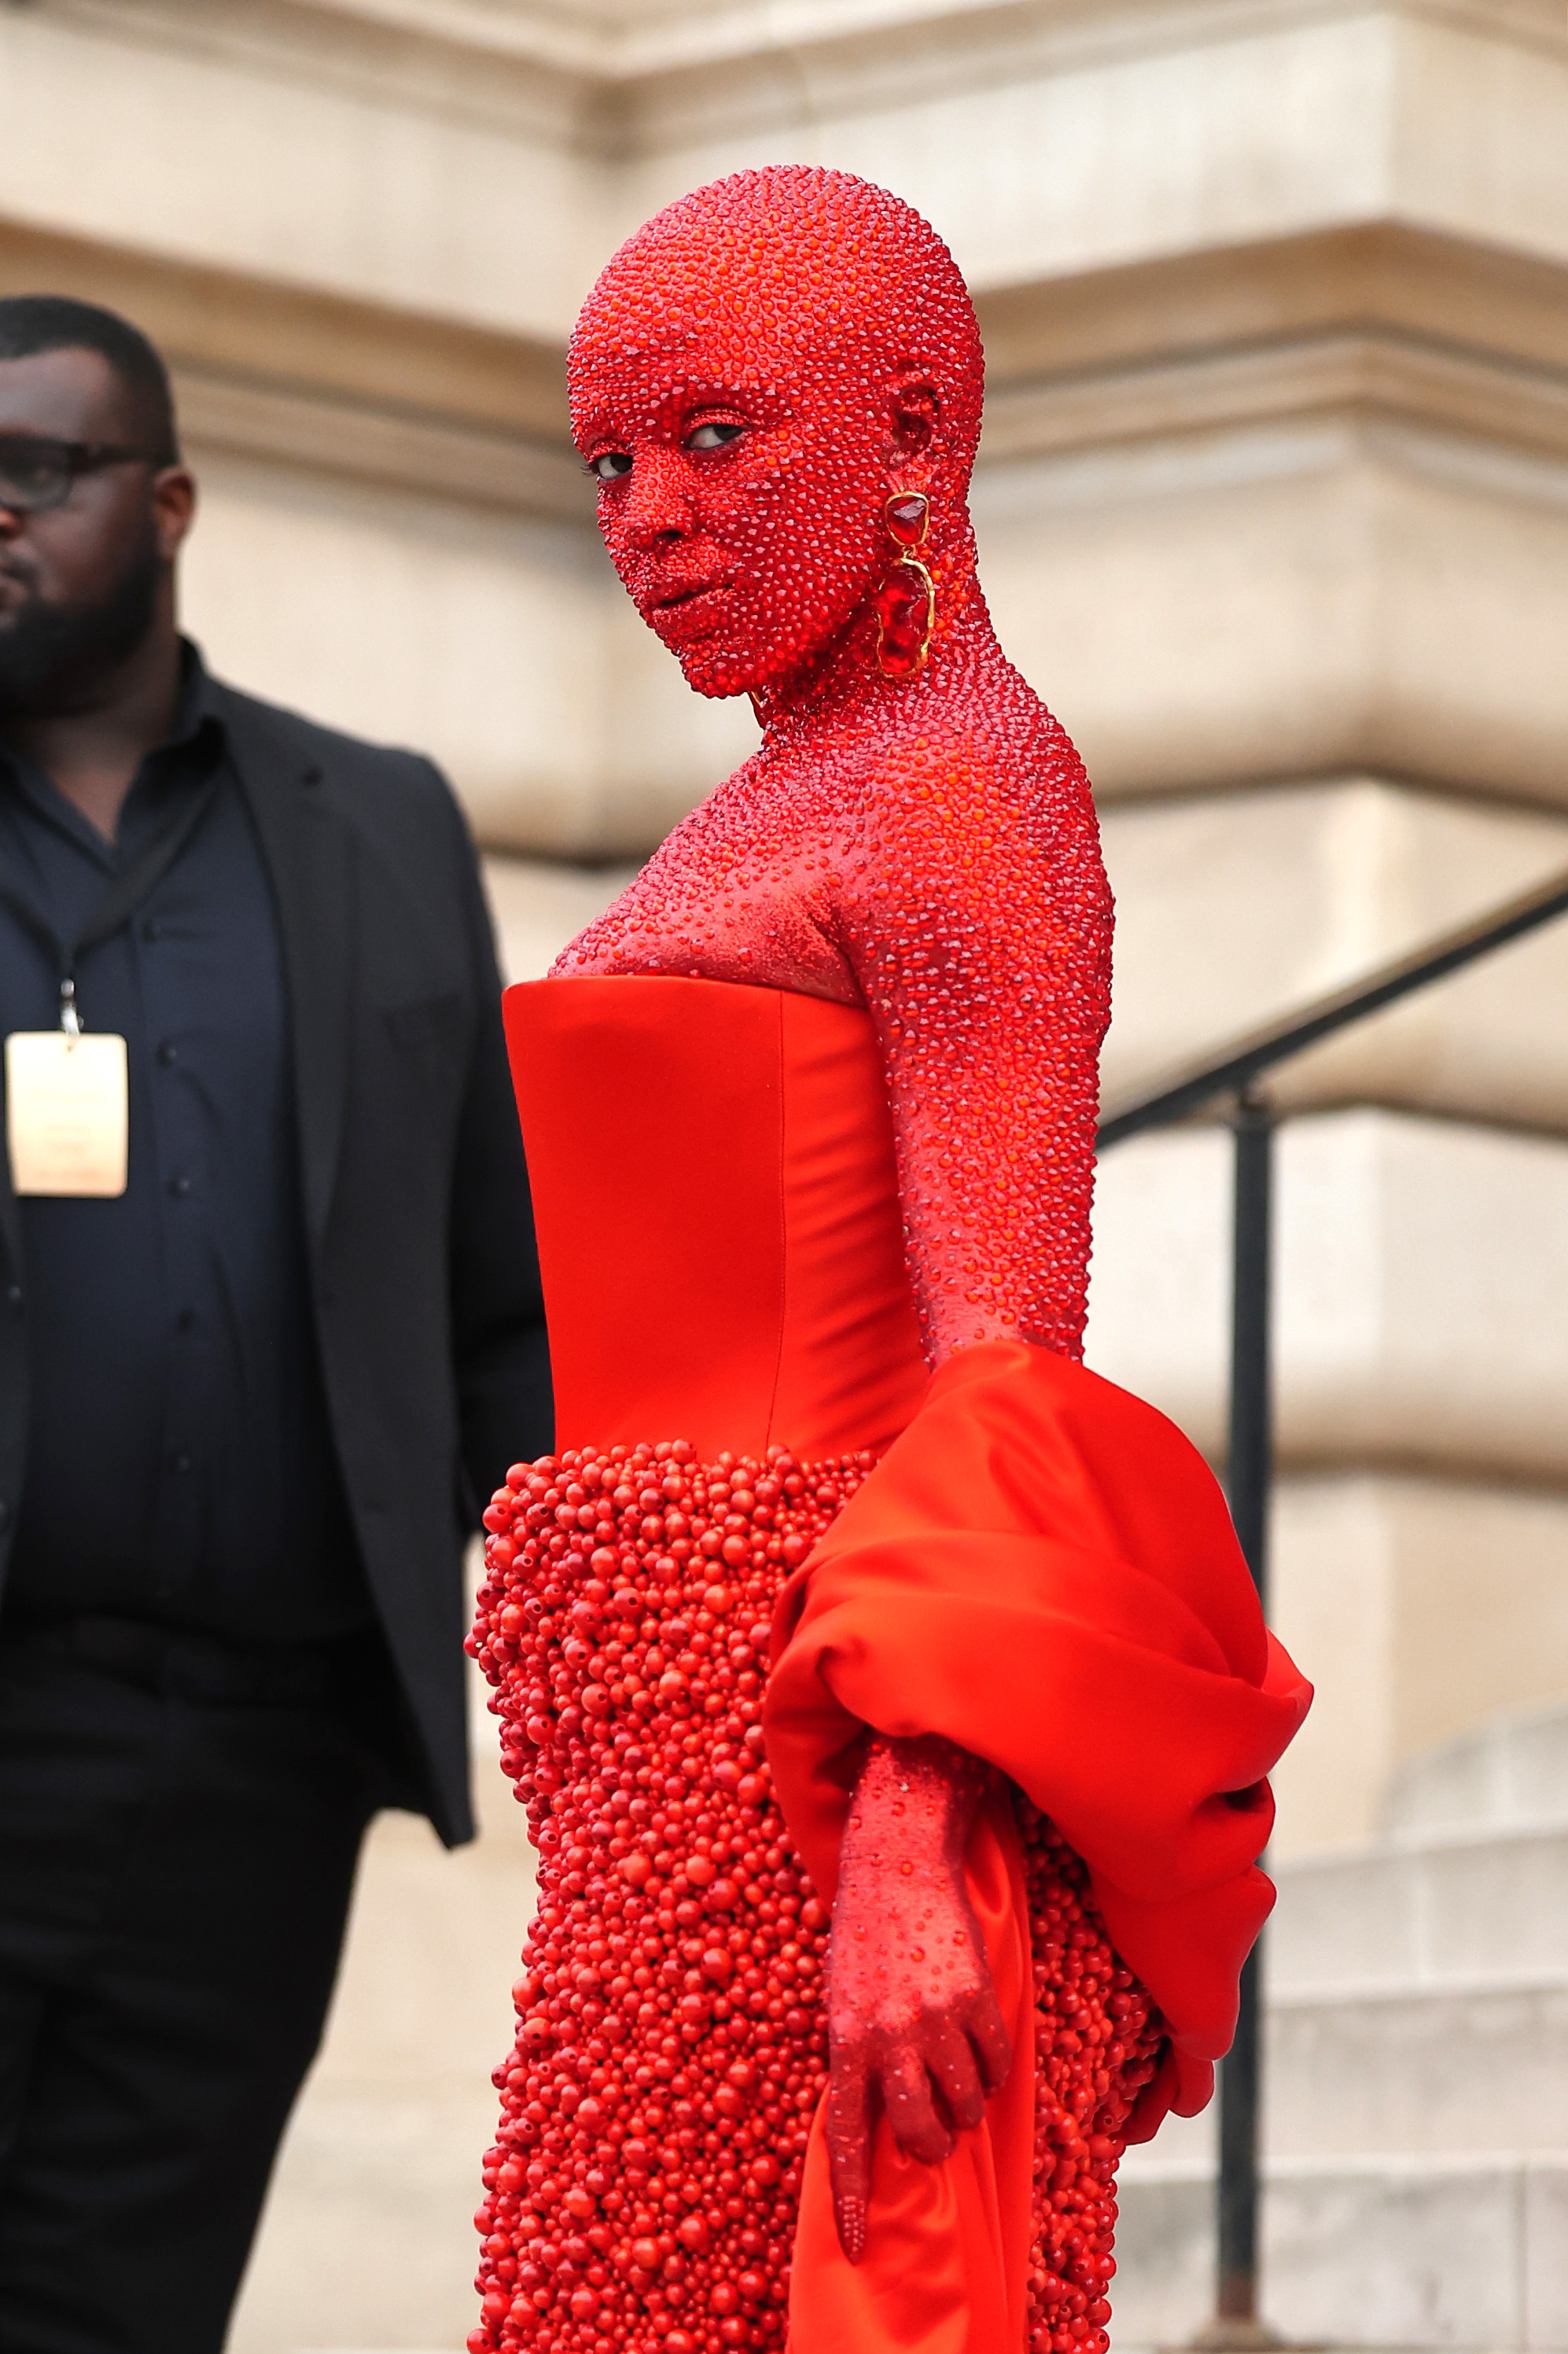 Doja Cat attends the Schiaparelli Haute Couture Spring Summer 2023 show as part of Paris Fashion Week, on January 23, 2023 in, Paris, France. | Source: Getty Images